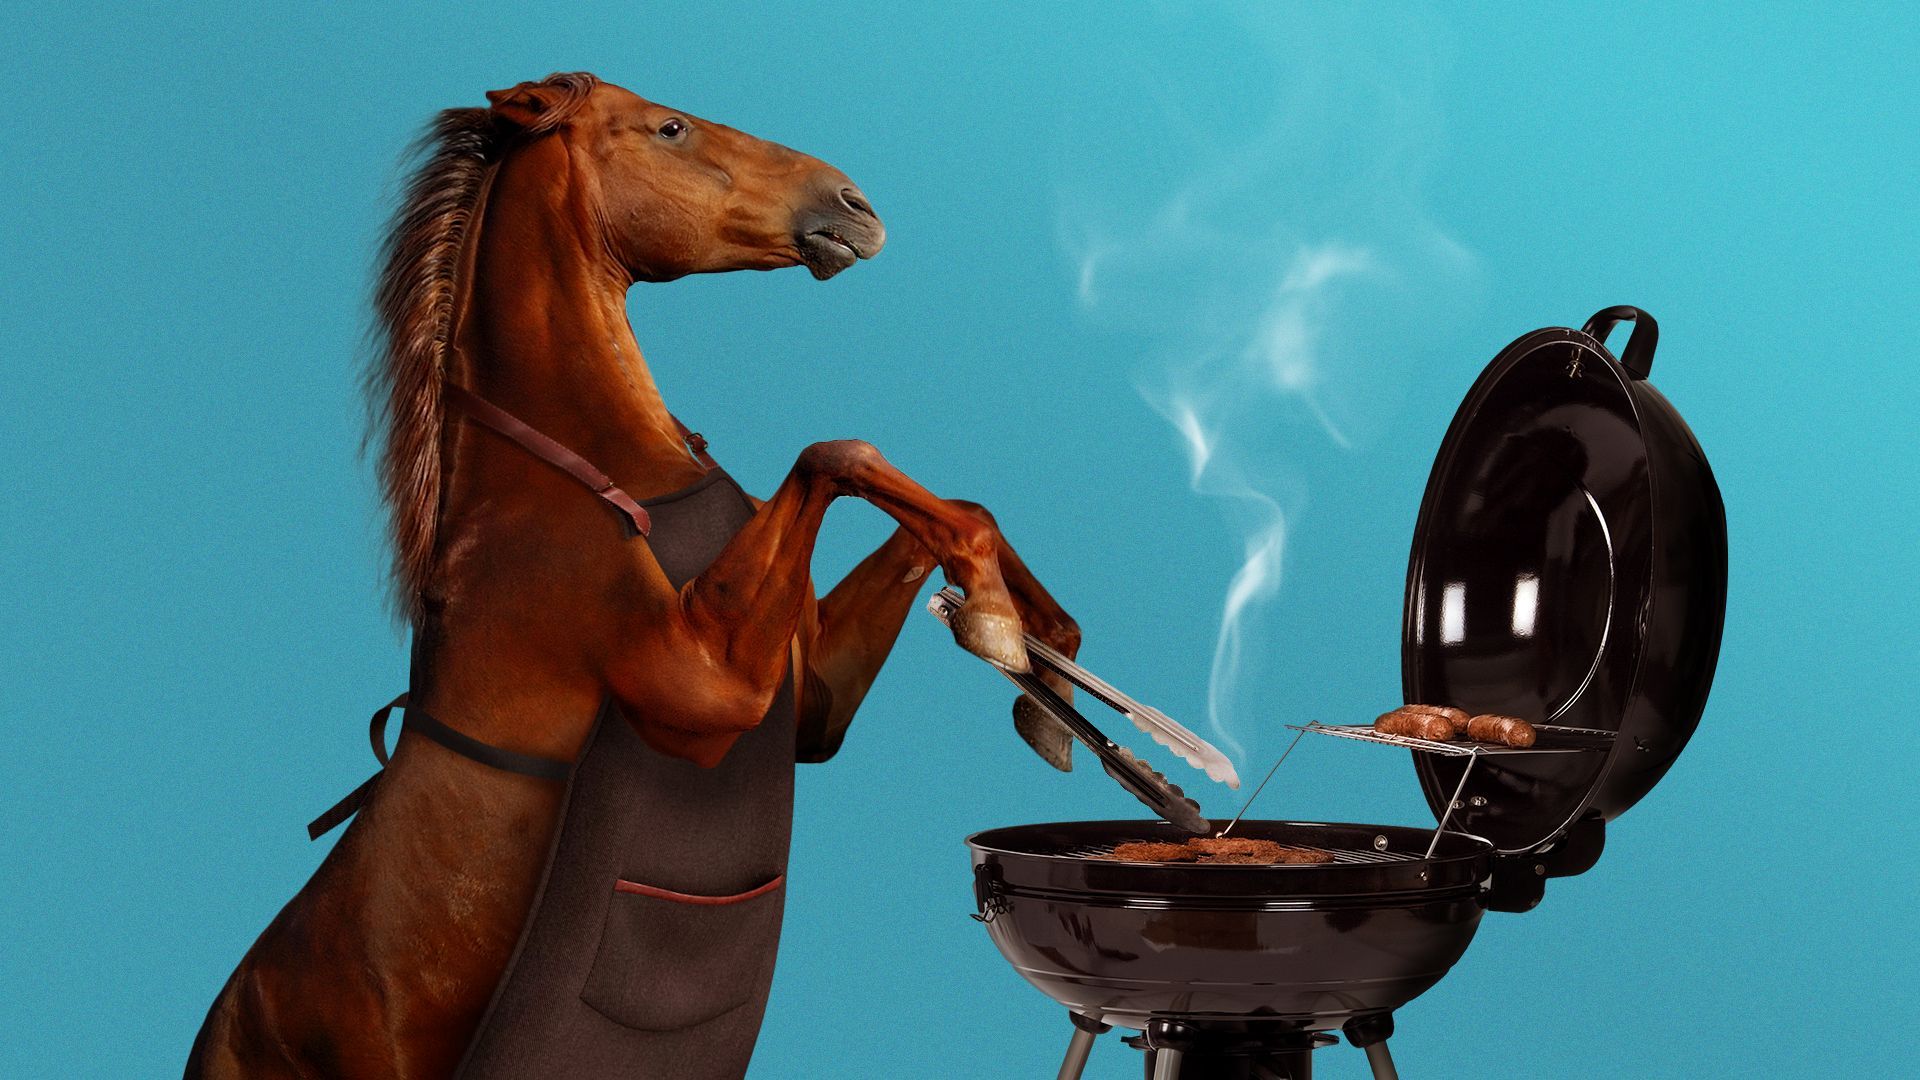 Illustration of a horse wearing an apron, while BBQing meat on a grill.